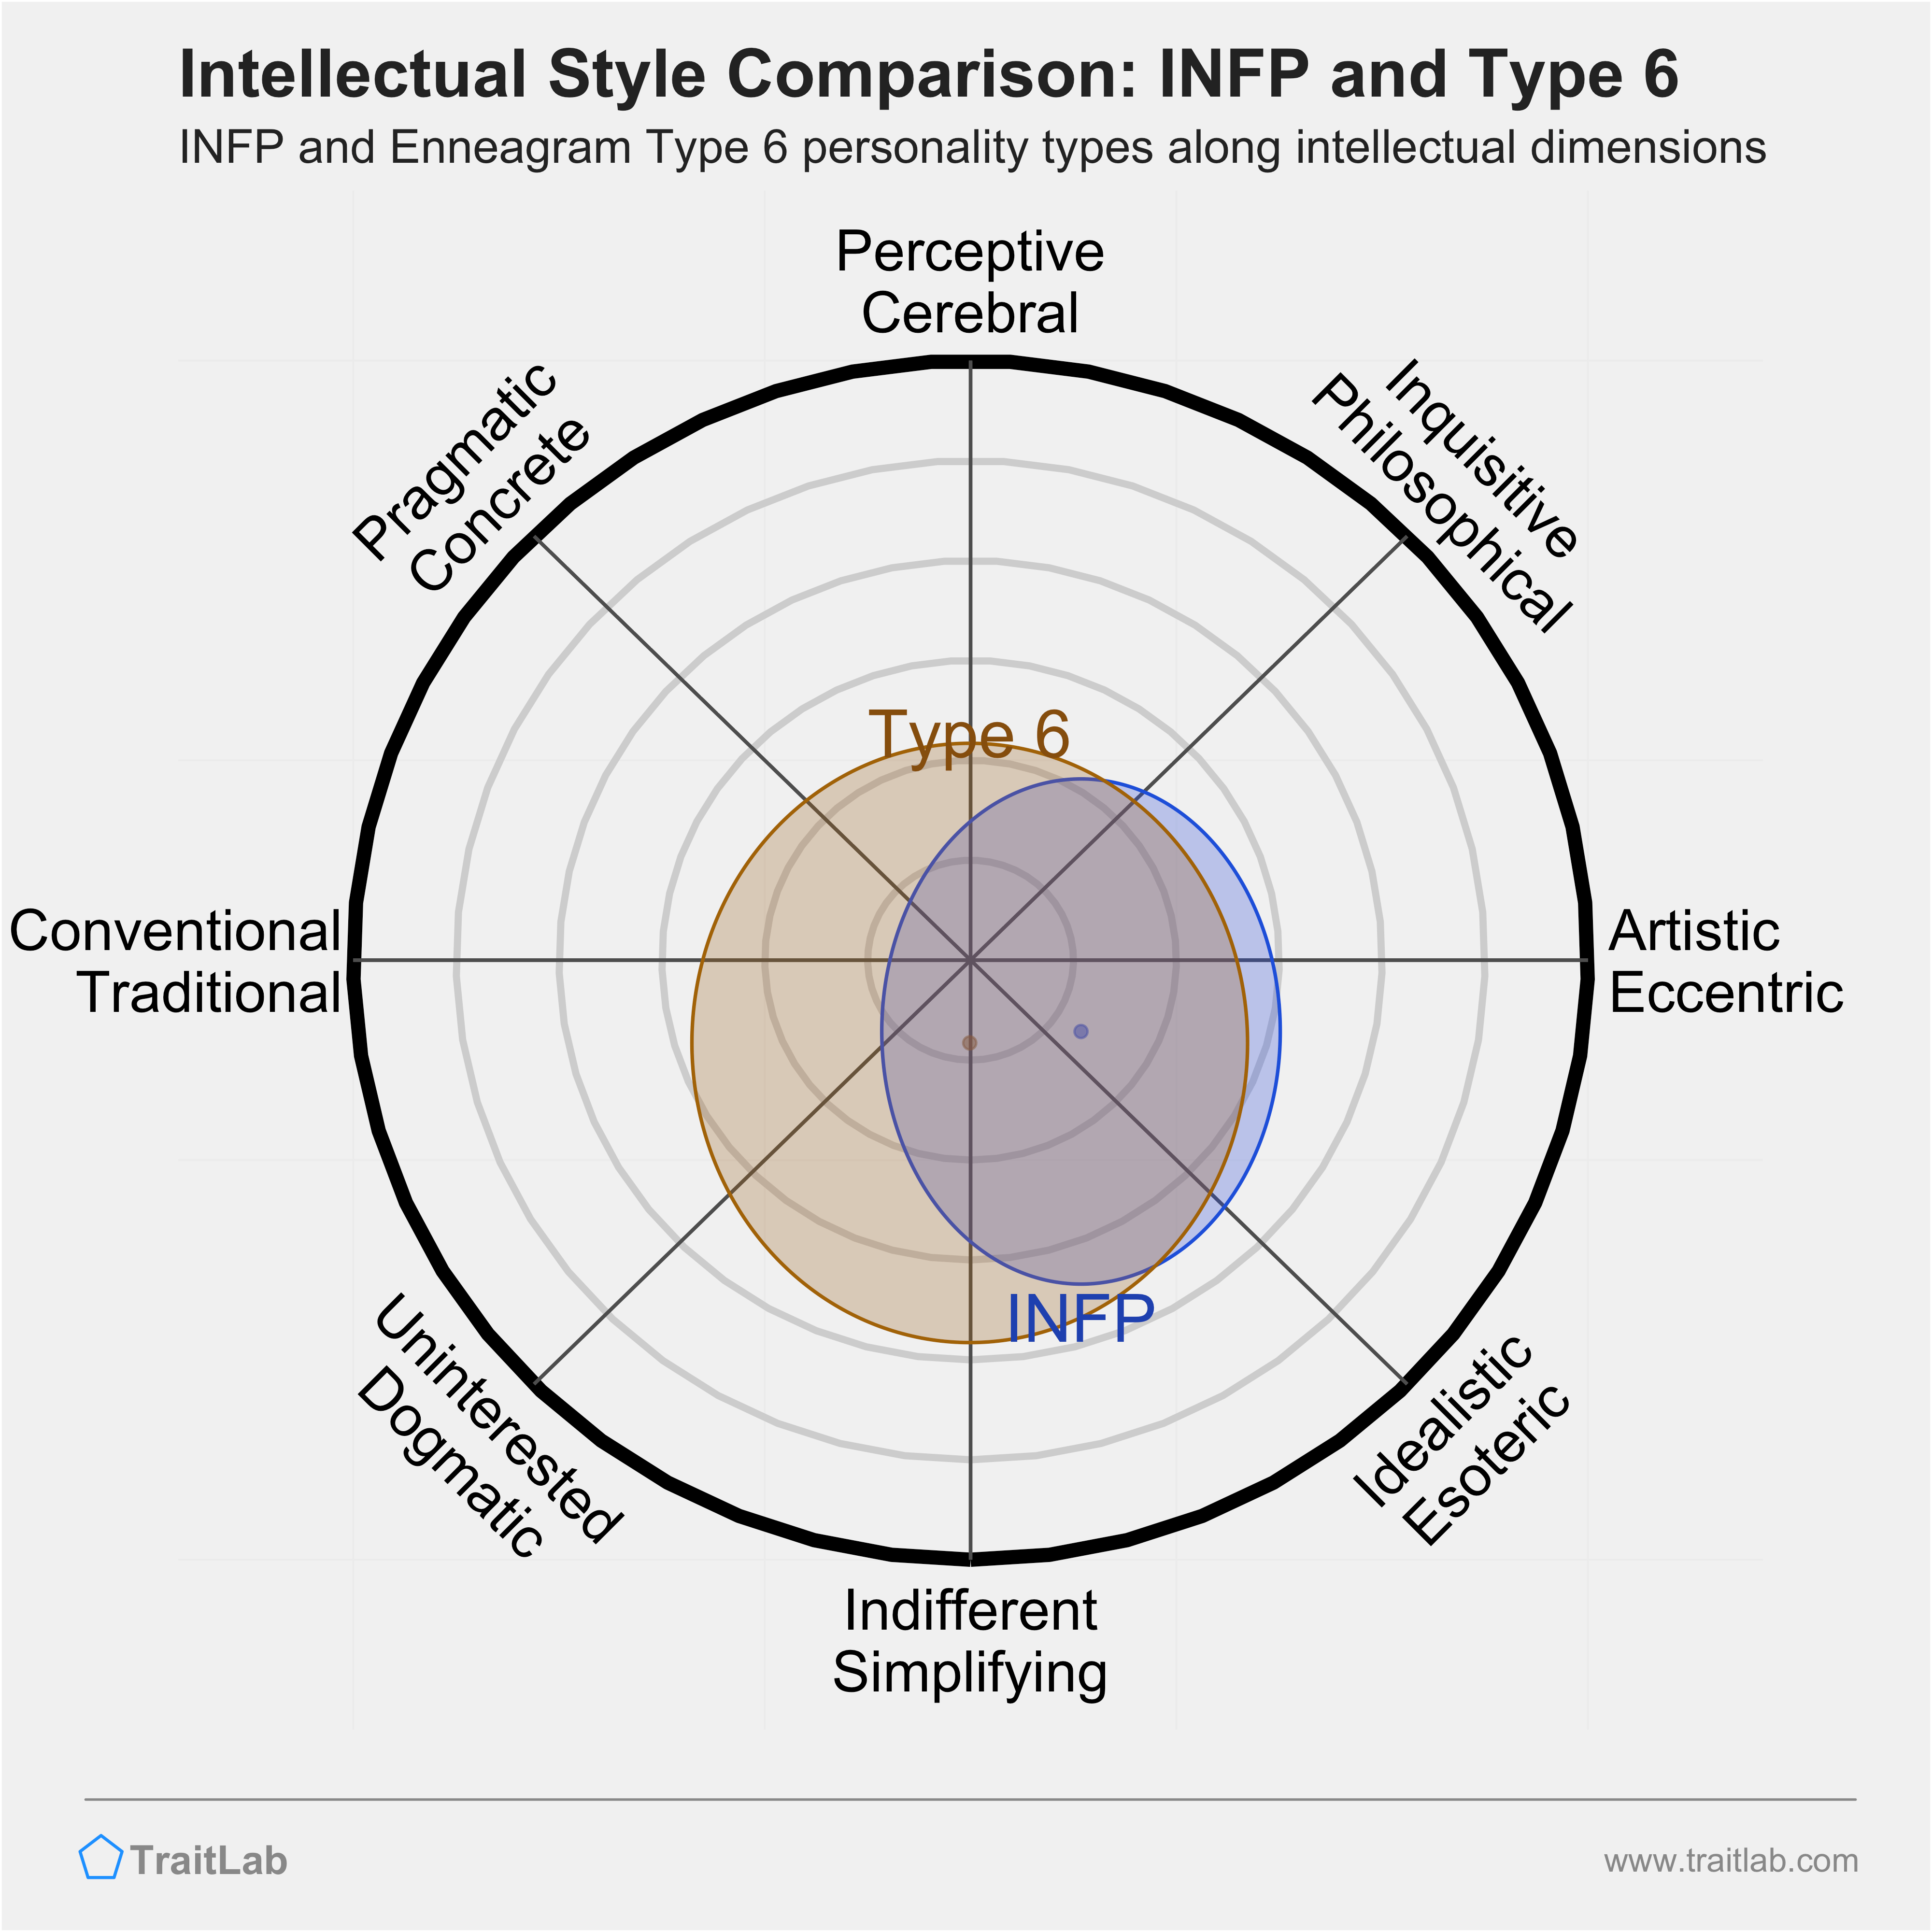 INFP and Type 6 comparison across intellectual dimensions